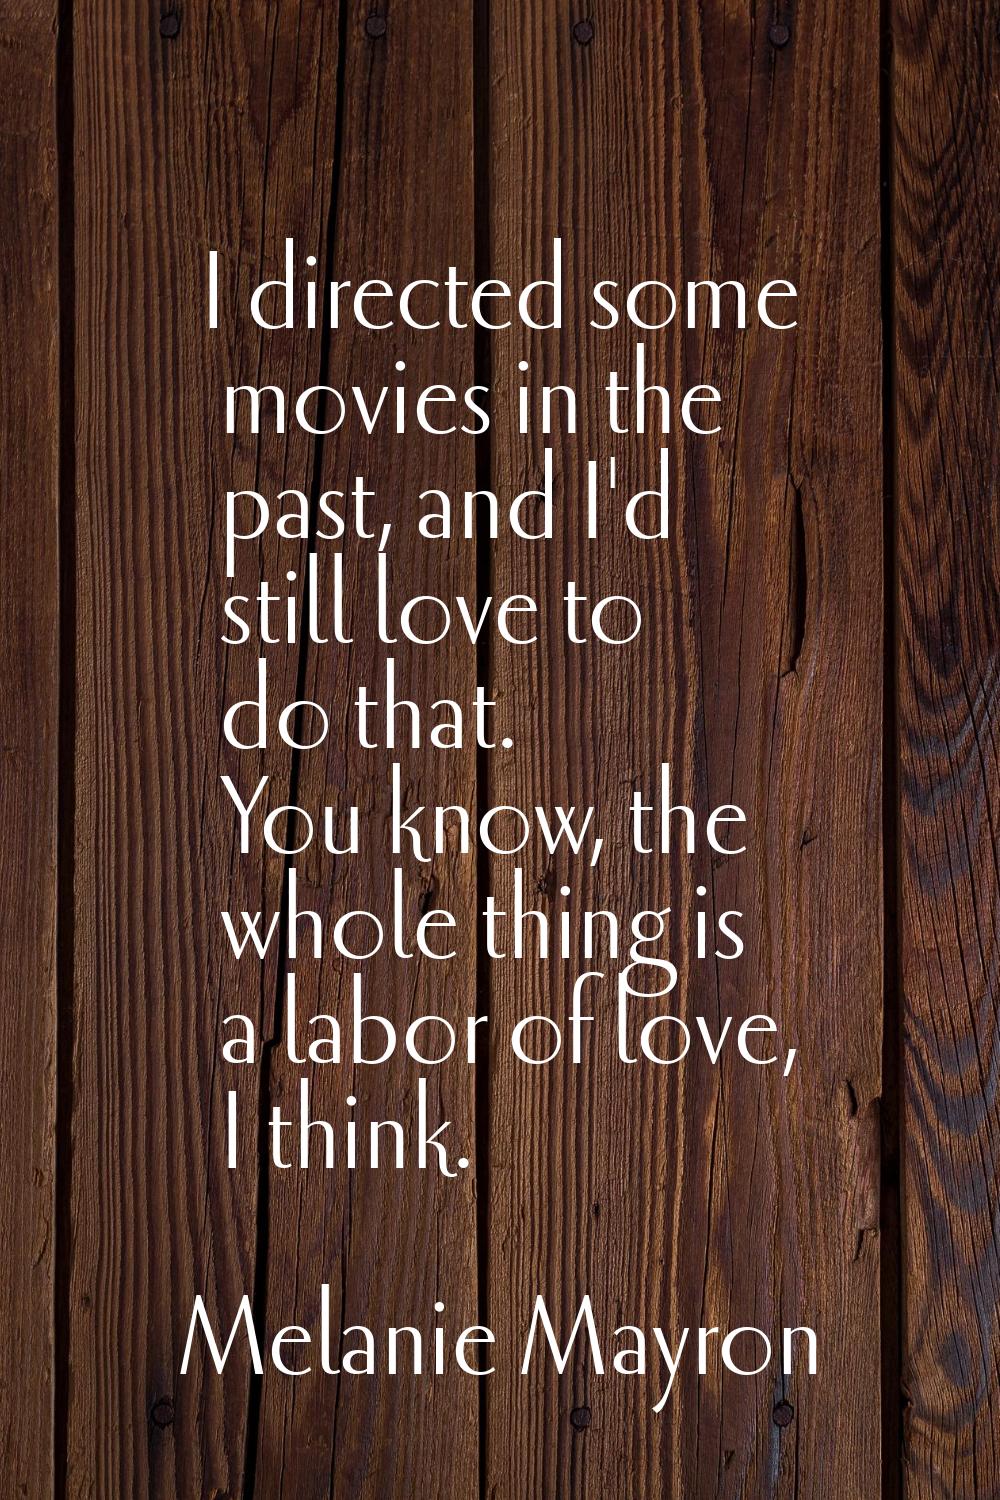 I directed some movies in the past, and I'd still love to do that. You know, the whole thing is a l